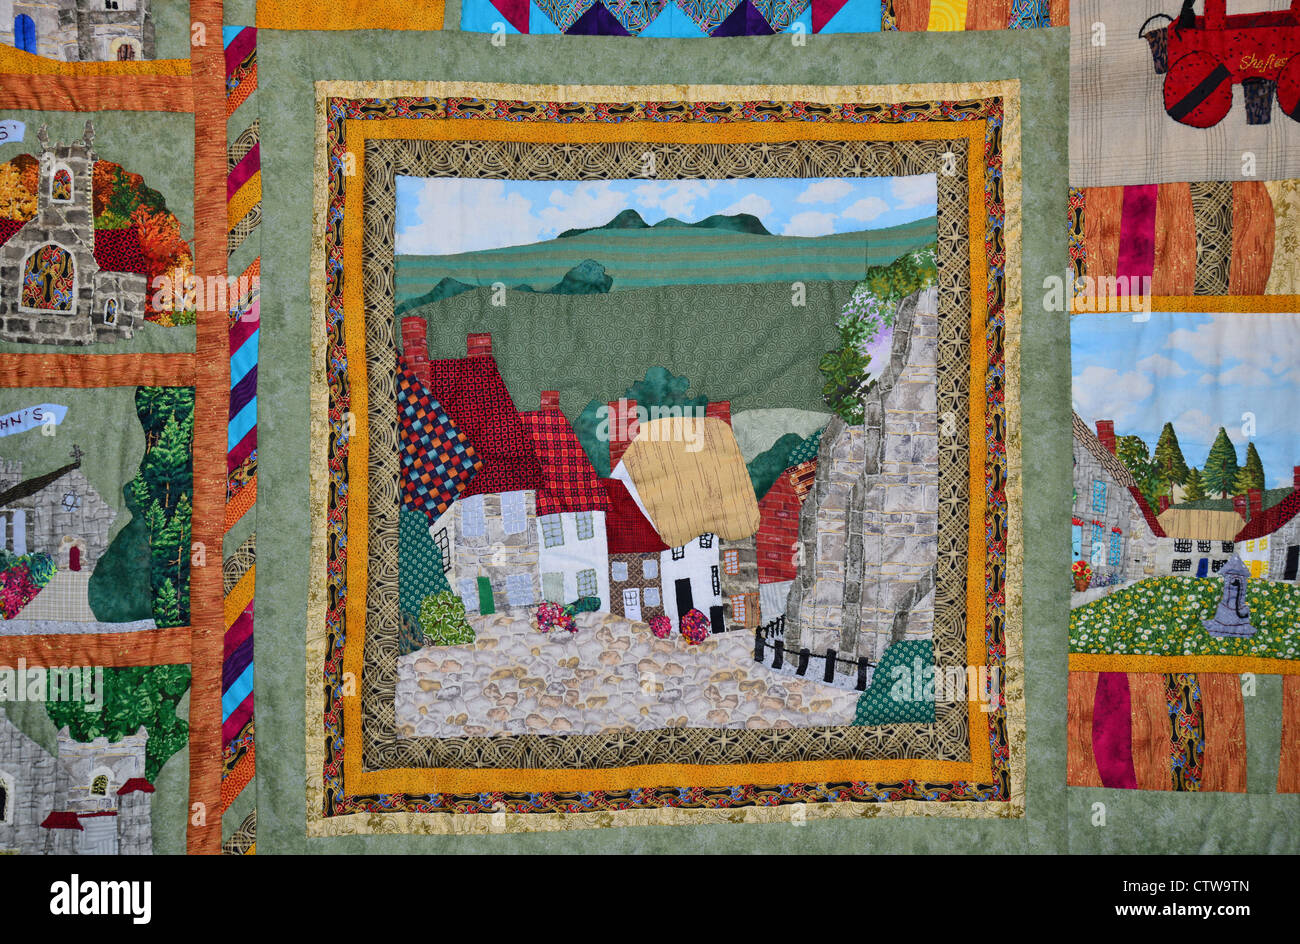 Embroidered quilt in Gold Hill Museum, Gold Hill, Shaftesbury, Dorset, England, United Kingdom Stock Photo